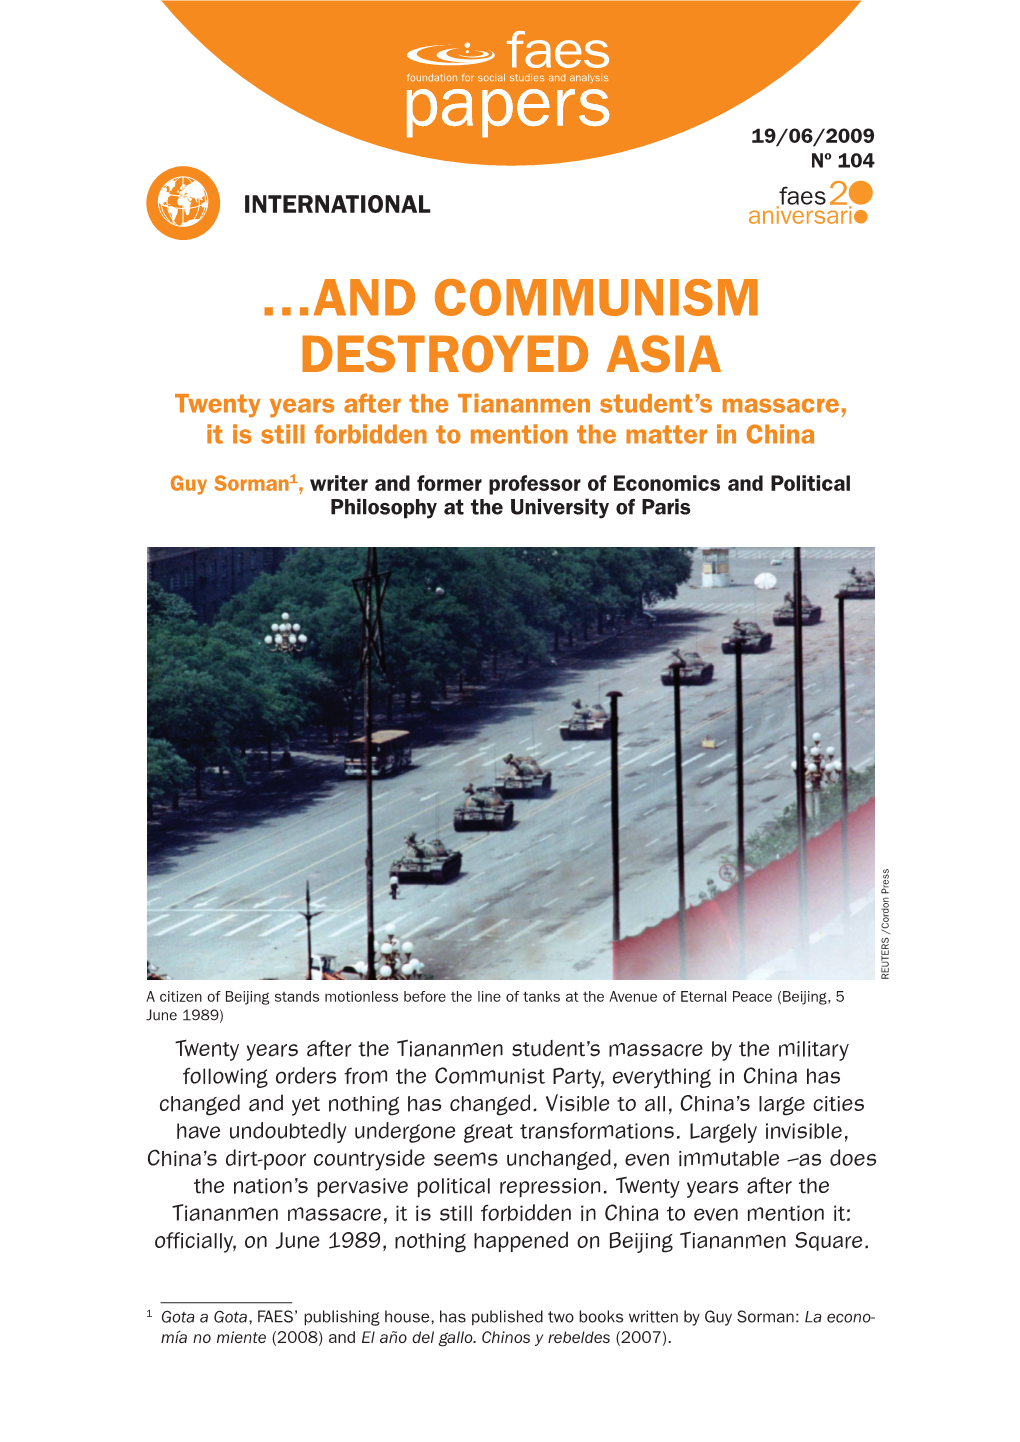 …AND COMMUNISM DESTROYED ASIA Twenty Years After the Tiananmen Student’S Massacre, It Is Still Forbidden to Mention the Matter in China